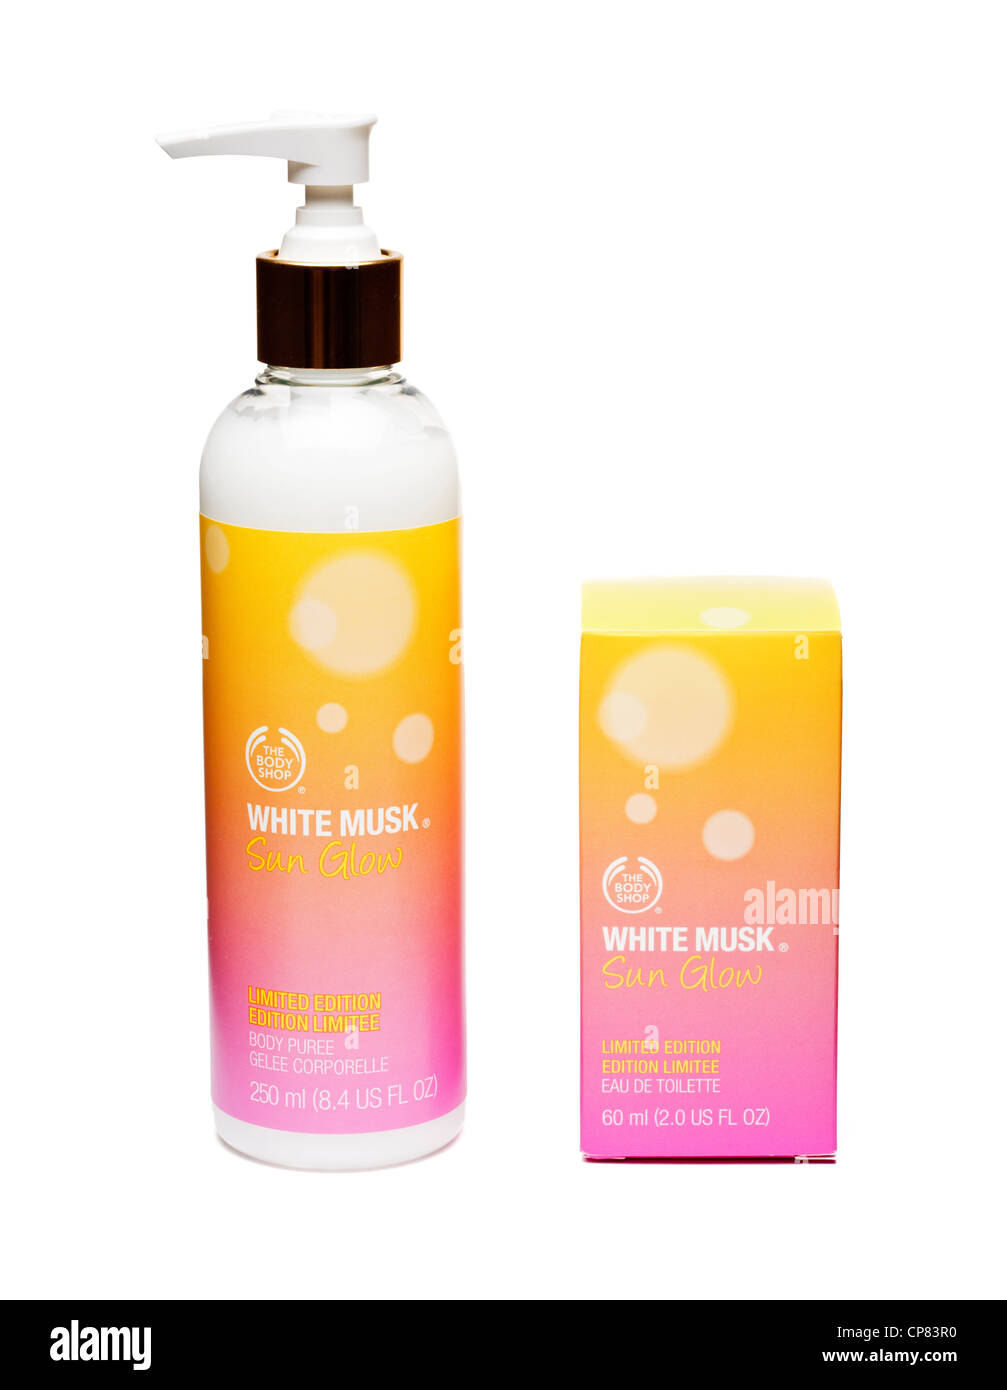 Body Shop products - White Musk, Sun Glow Limited Edition, moisturiser and perfume Stock Photo